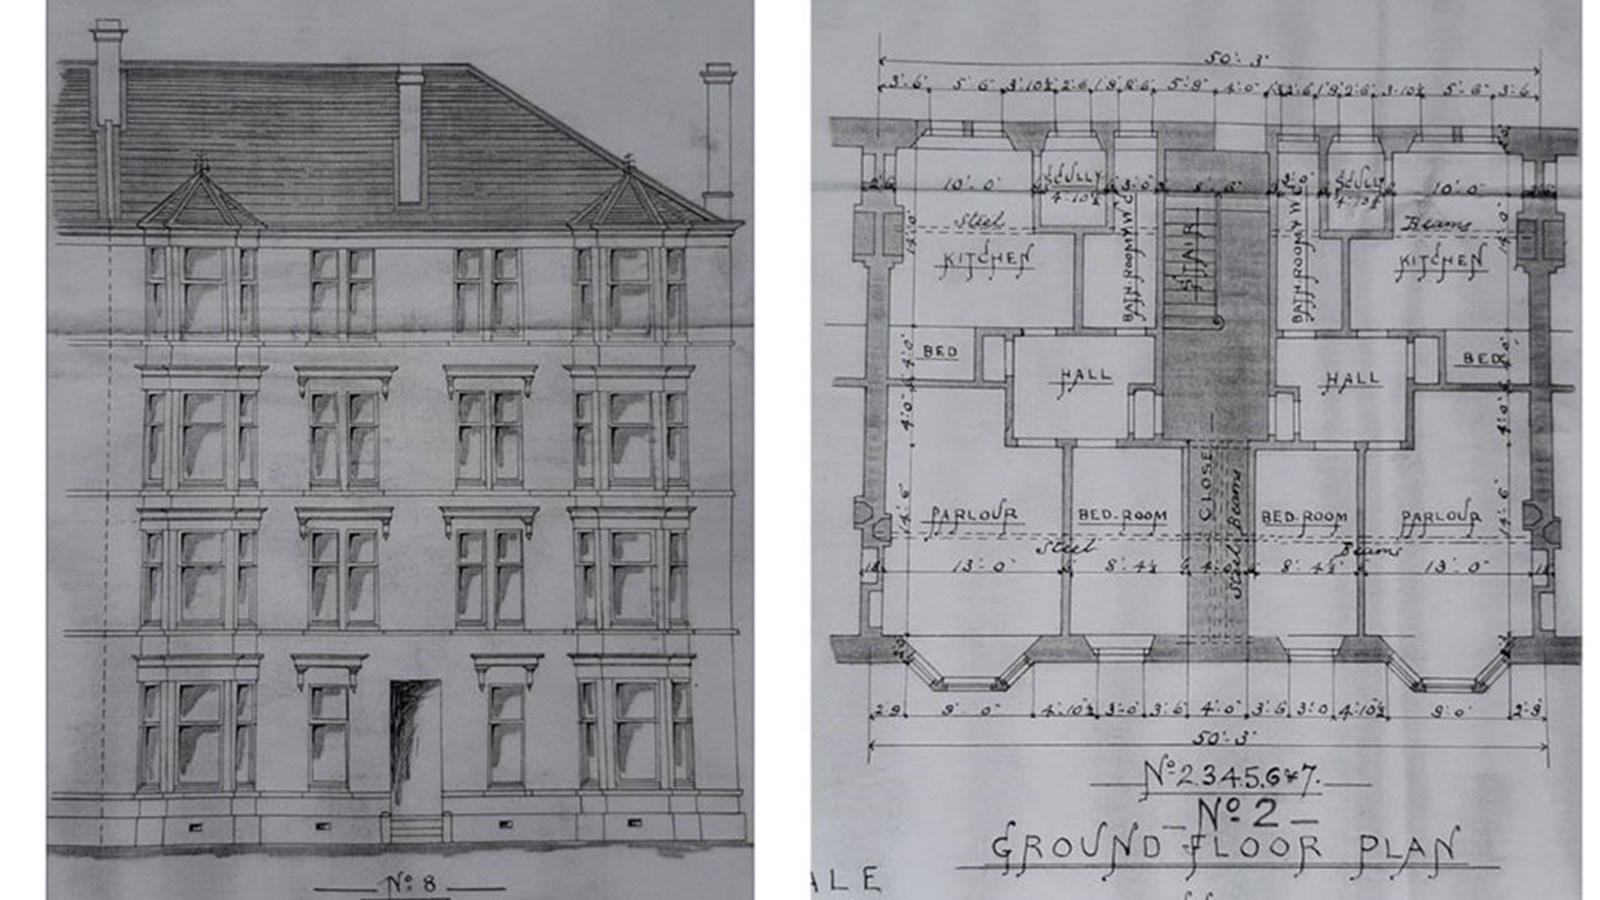 A drawing of a housing plan including front elevation and ground floor plans, drawn in pencil on white paper.